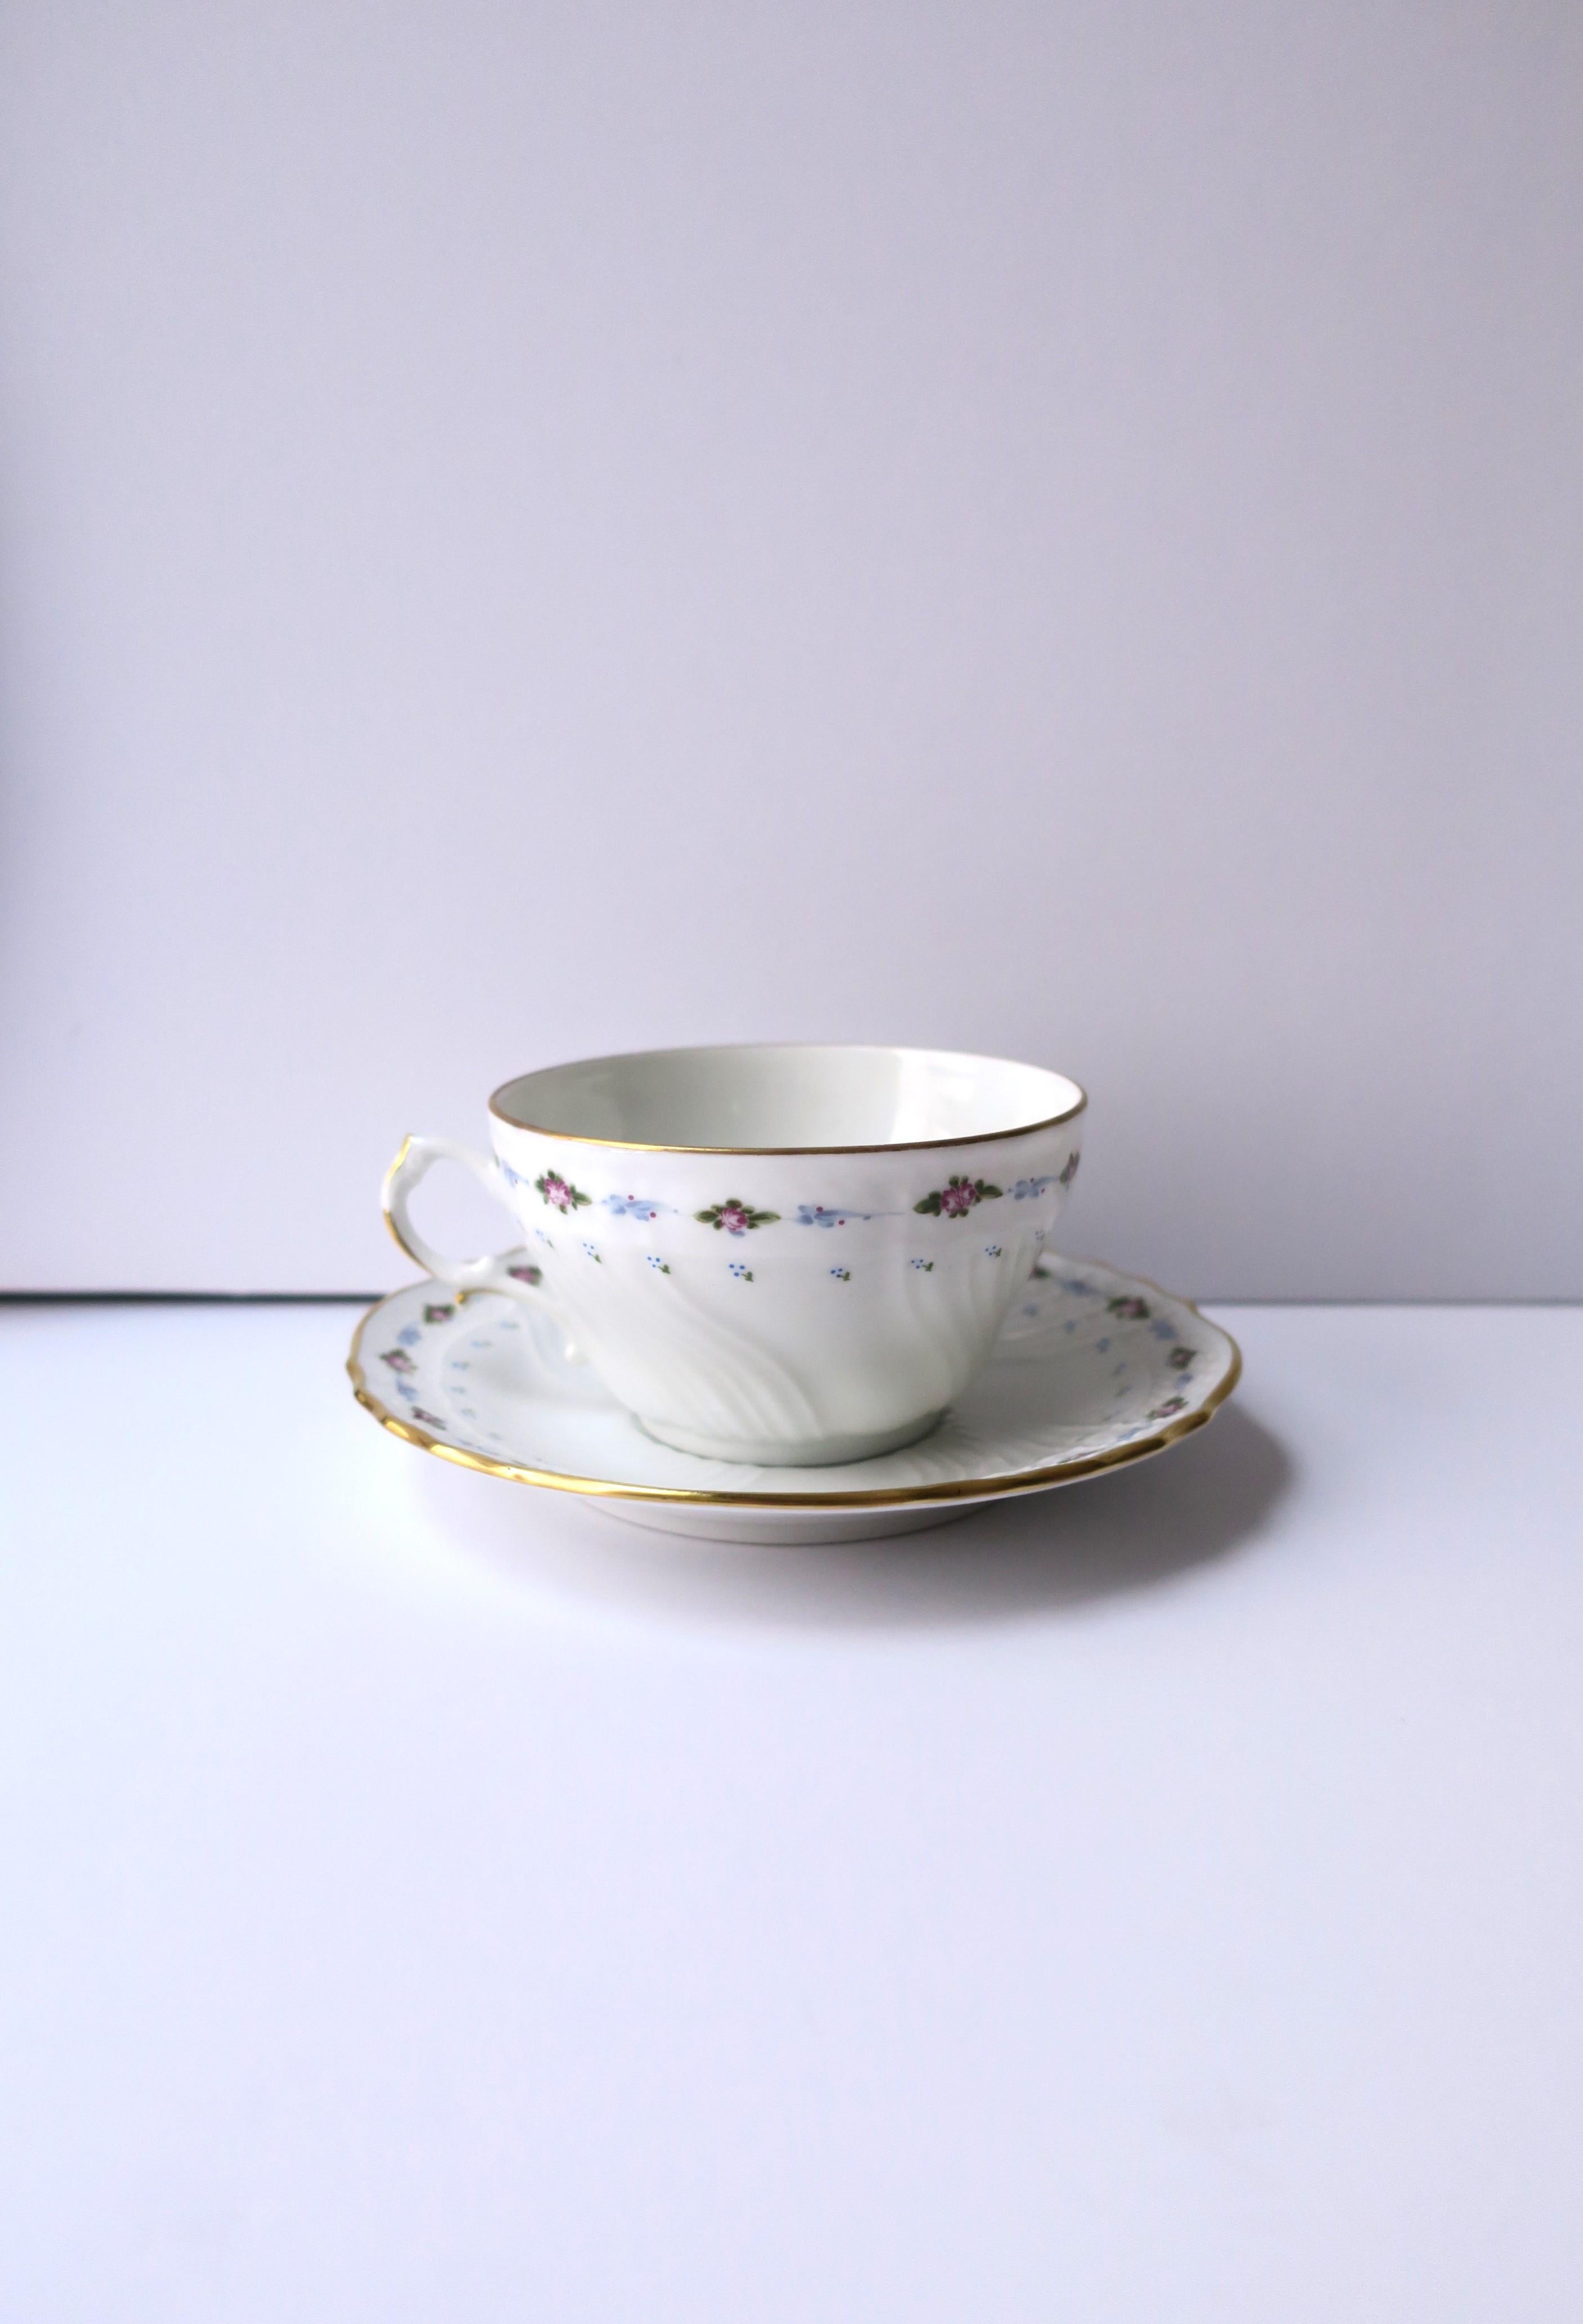 Richard Ginori Italian Porcelain Coffee or Tea Cup & Saucer, 1991 In Good Condition For Sale In New York, NY